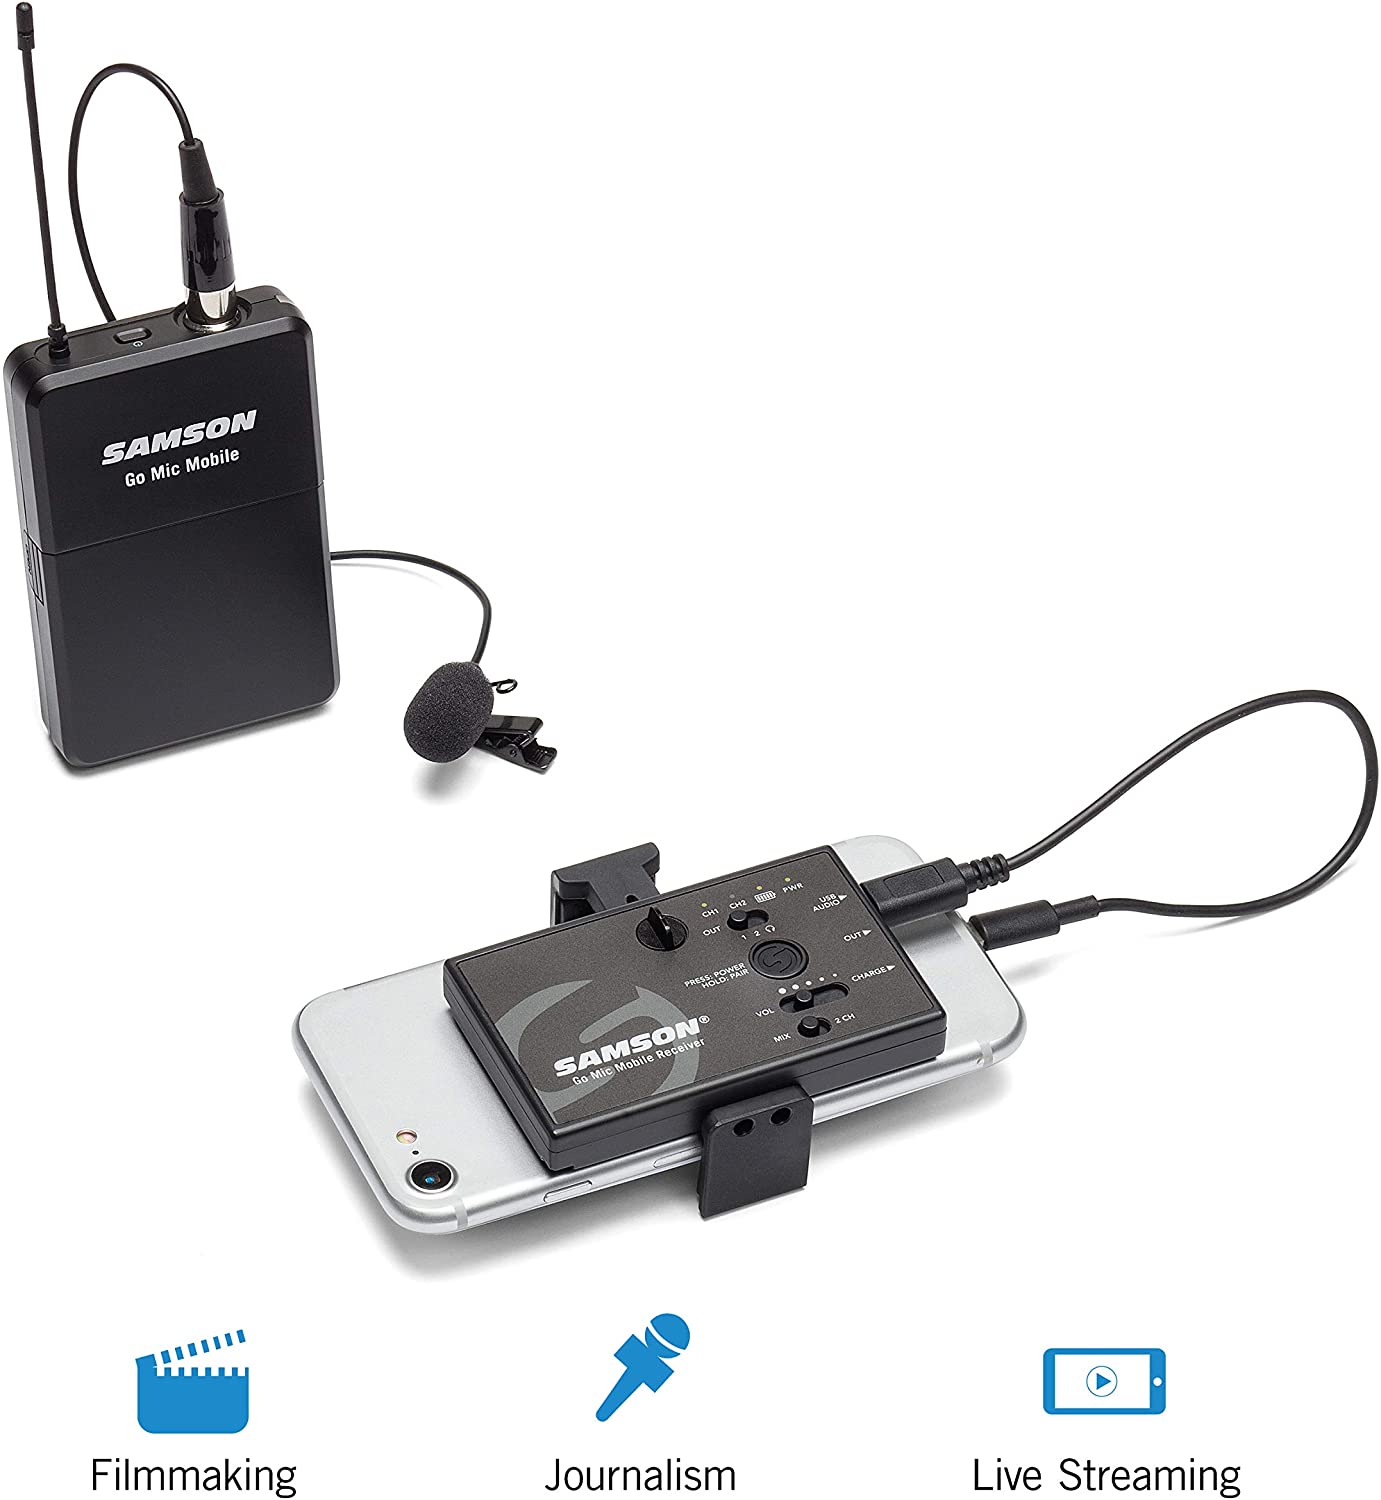 SAMSON Go Mic Mobile Professional Lavalier Wireless System for Mobile Video - Pro-Distributing